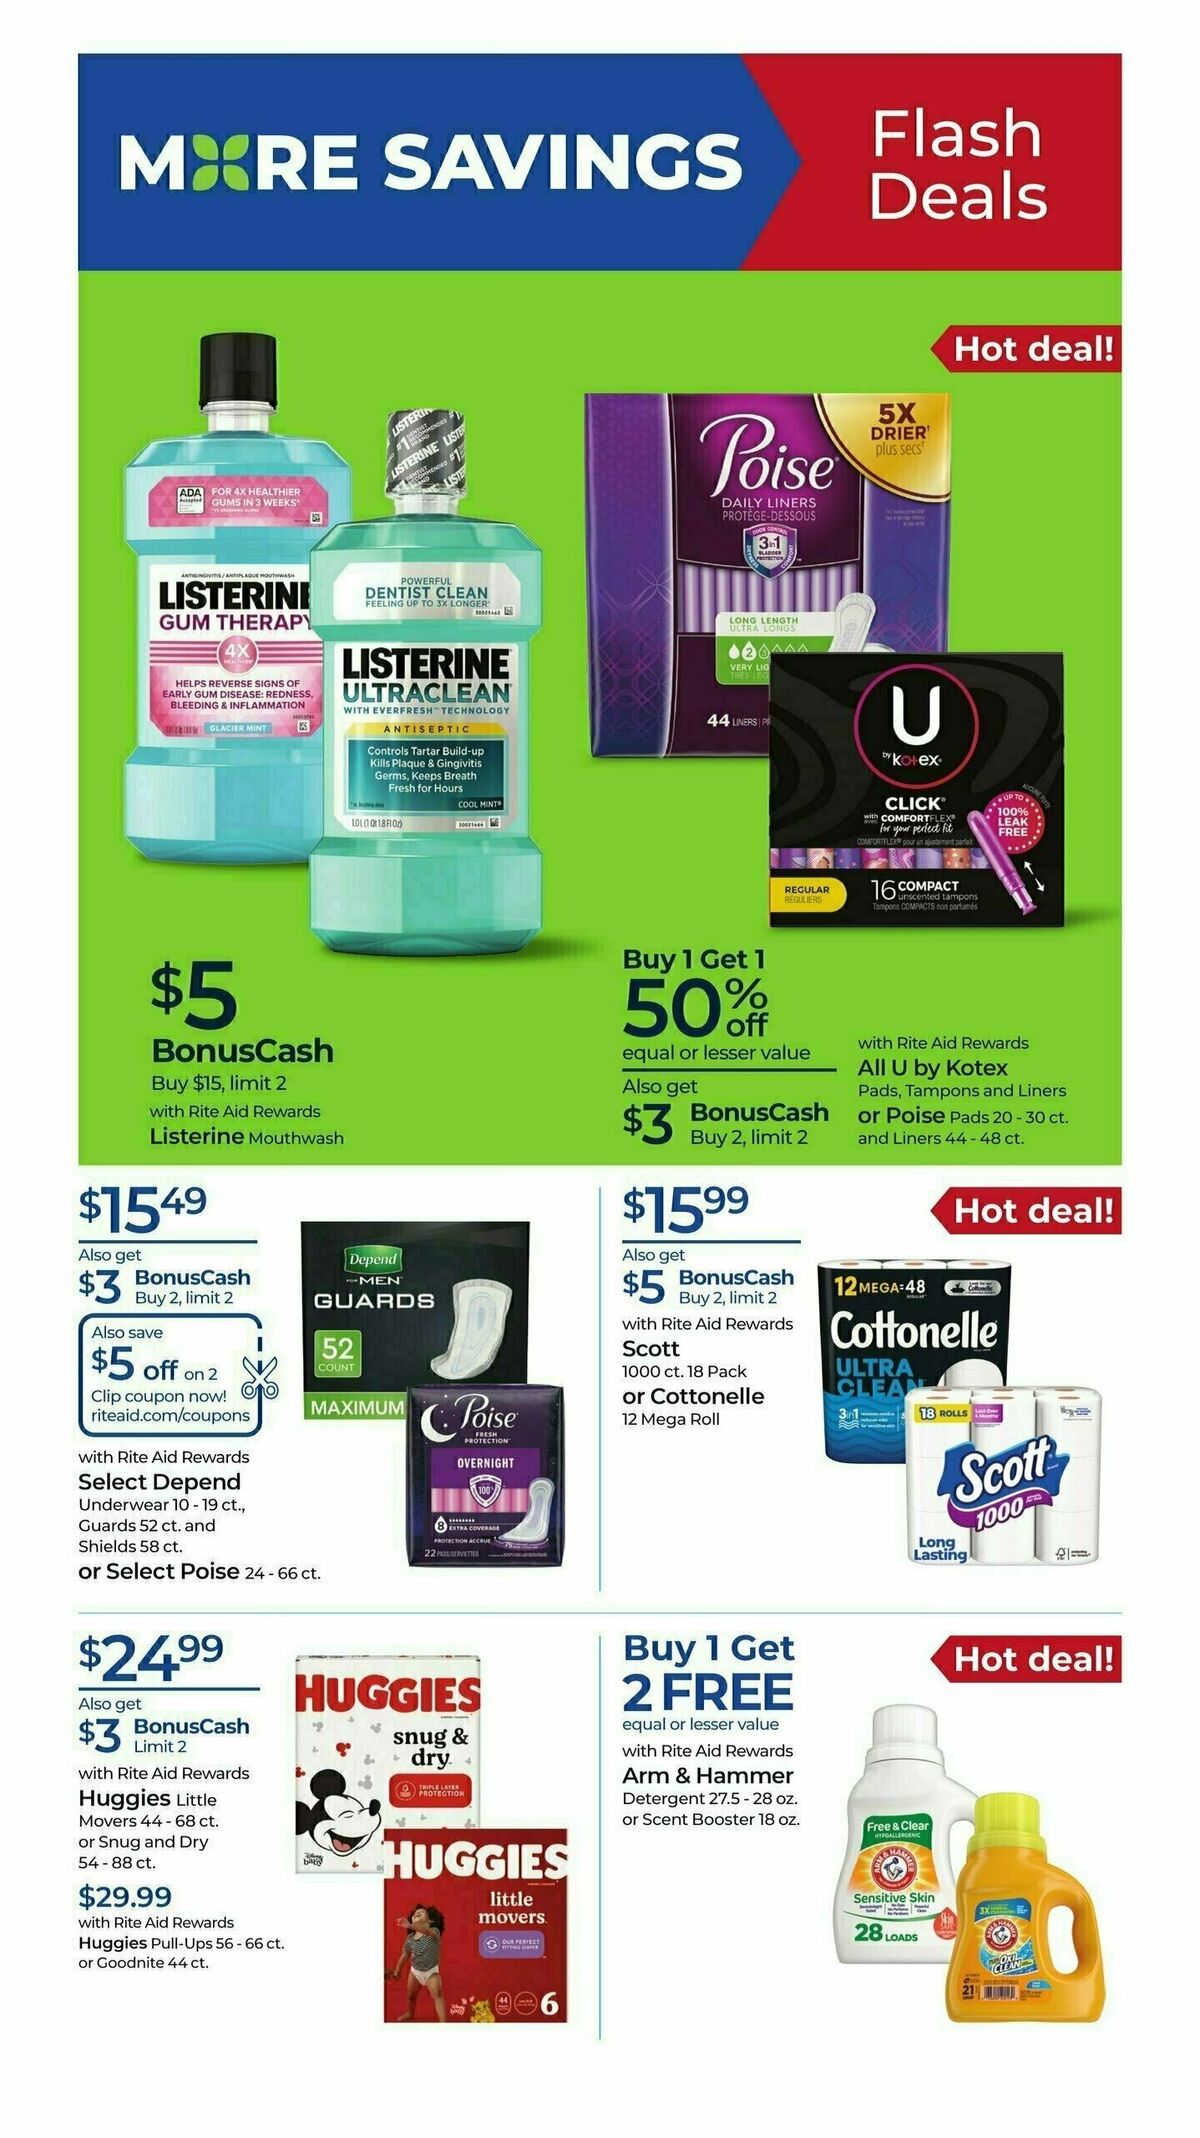 Rite Aid Weekly Ad from April 7